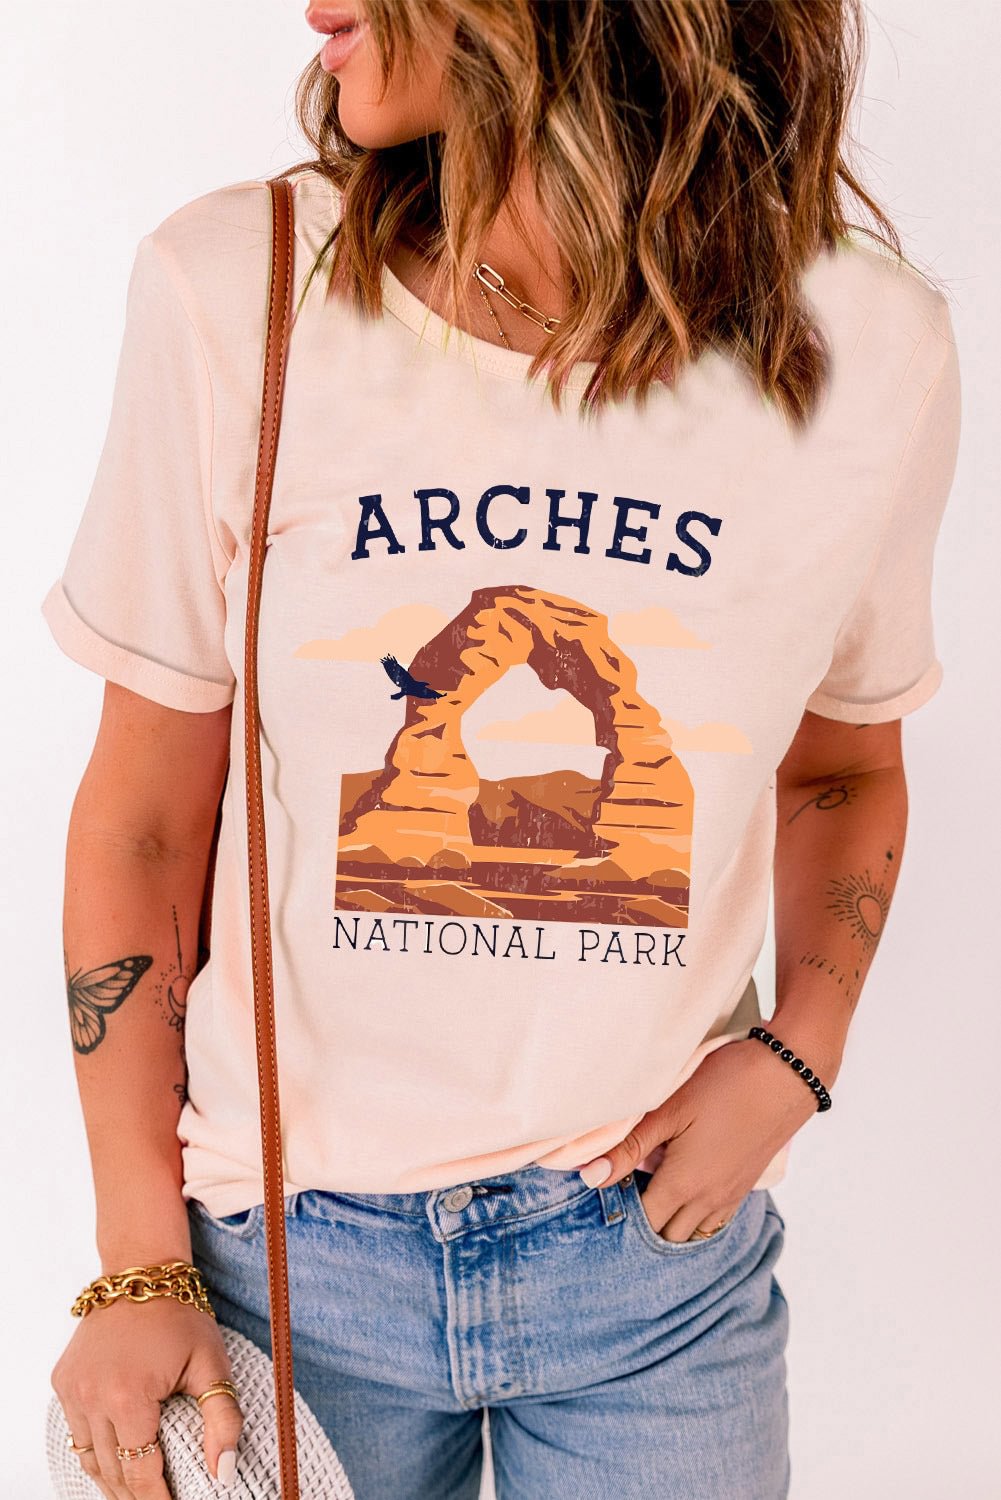 ARCHES National Park Graphic Print Short Sleeve T Shirt